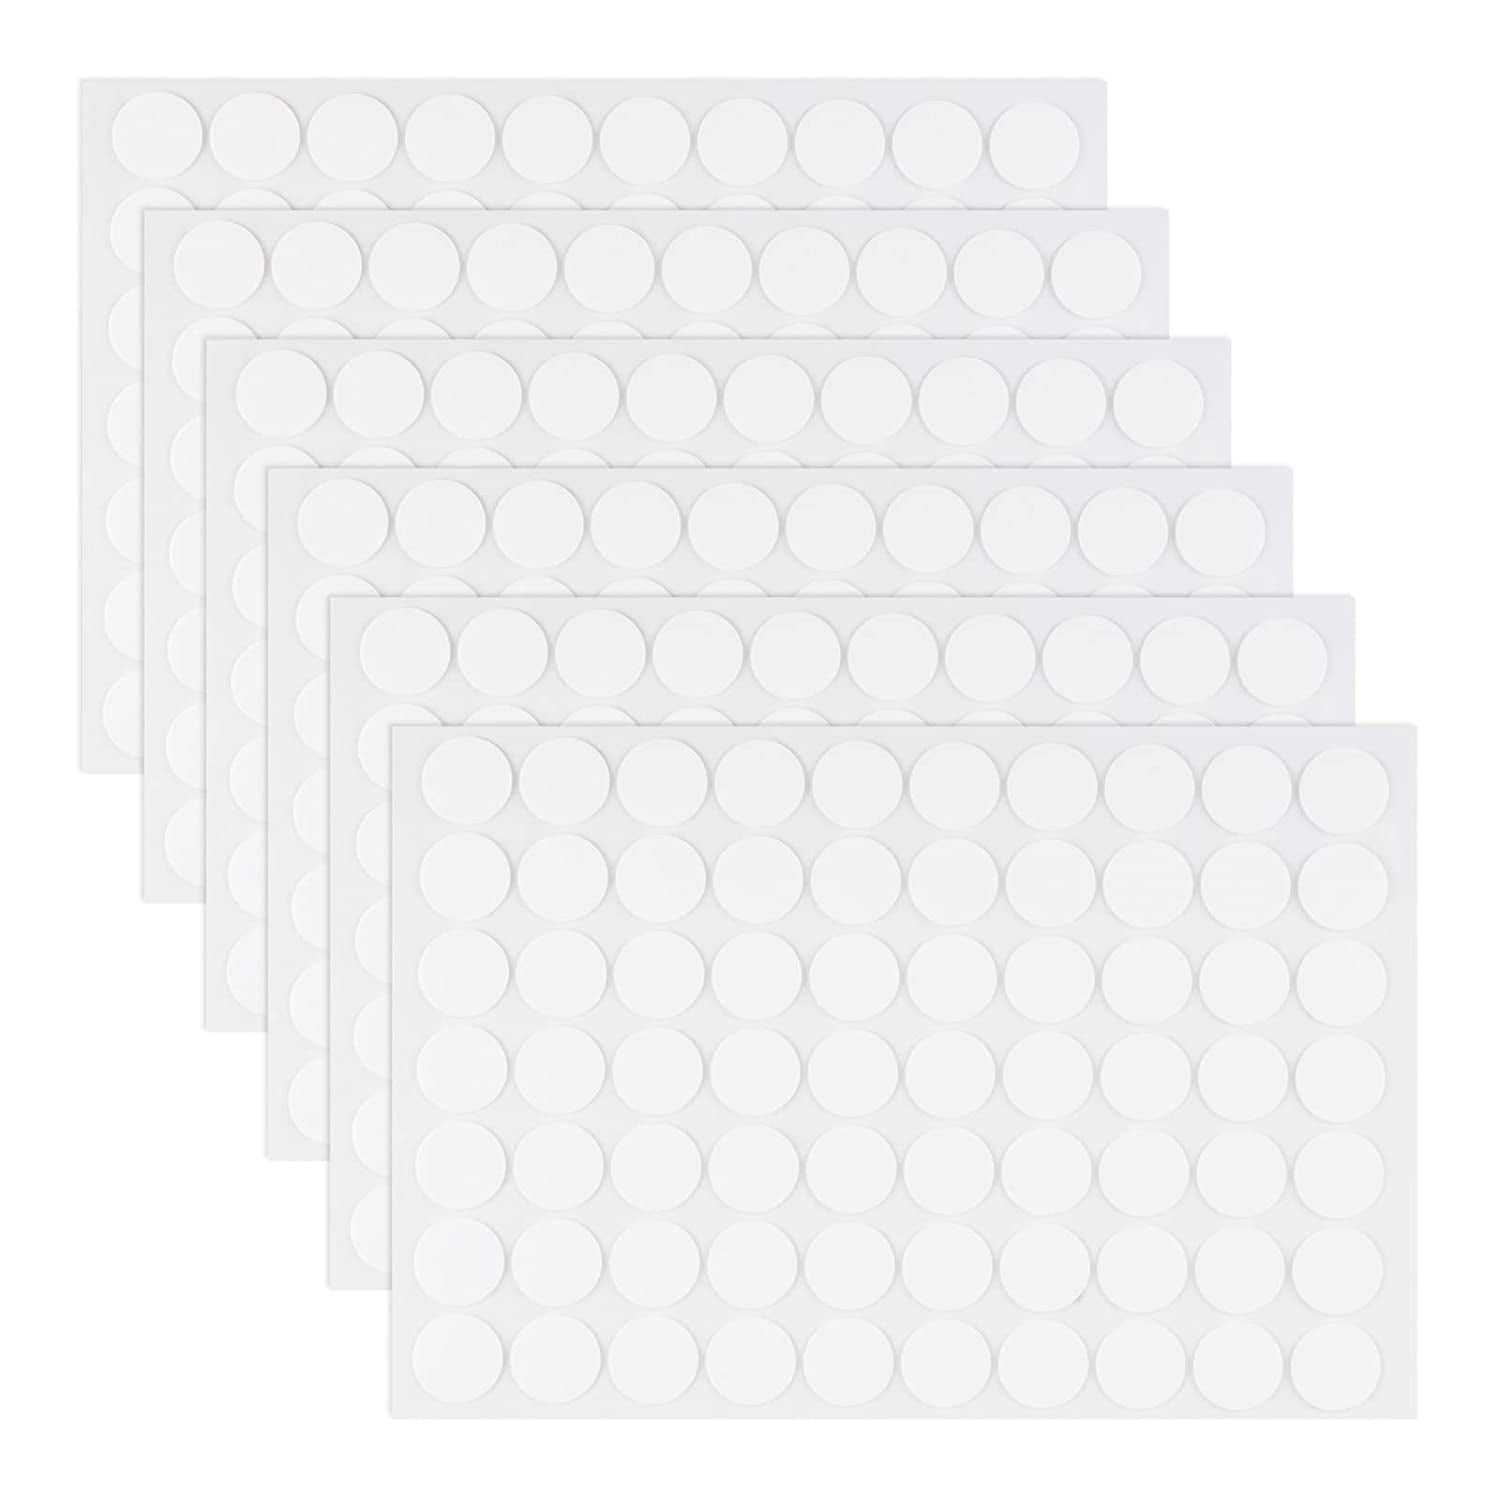 6 Sheets Foam Sticky Strips Double Sided Adhesive EVA Foam Tapes